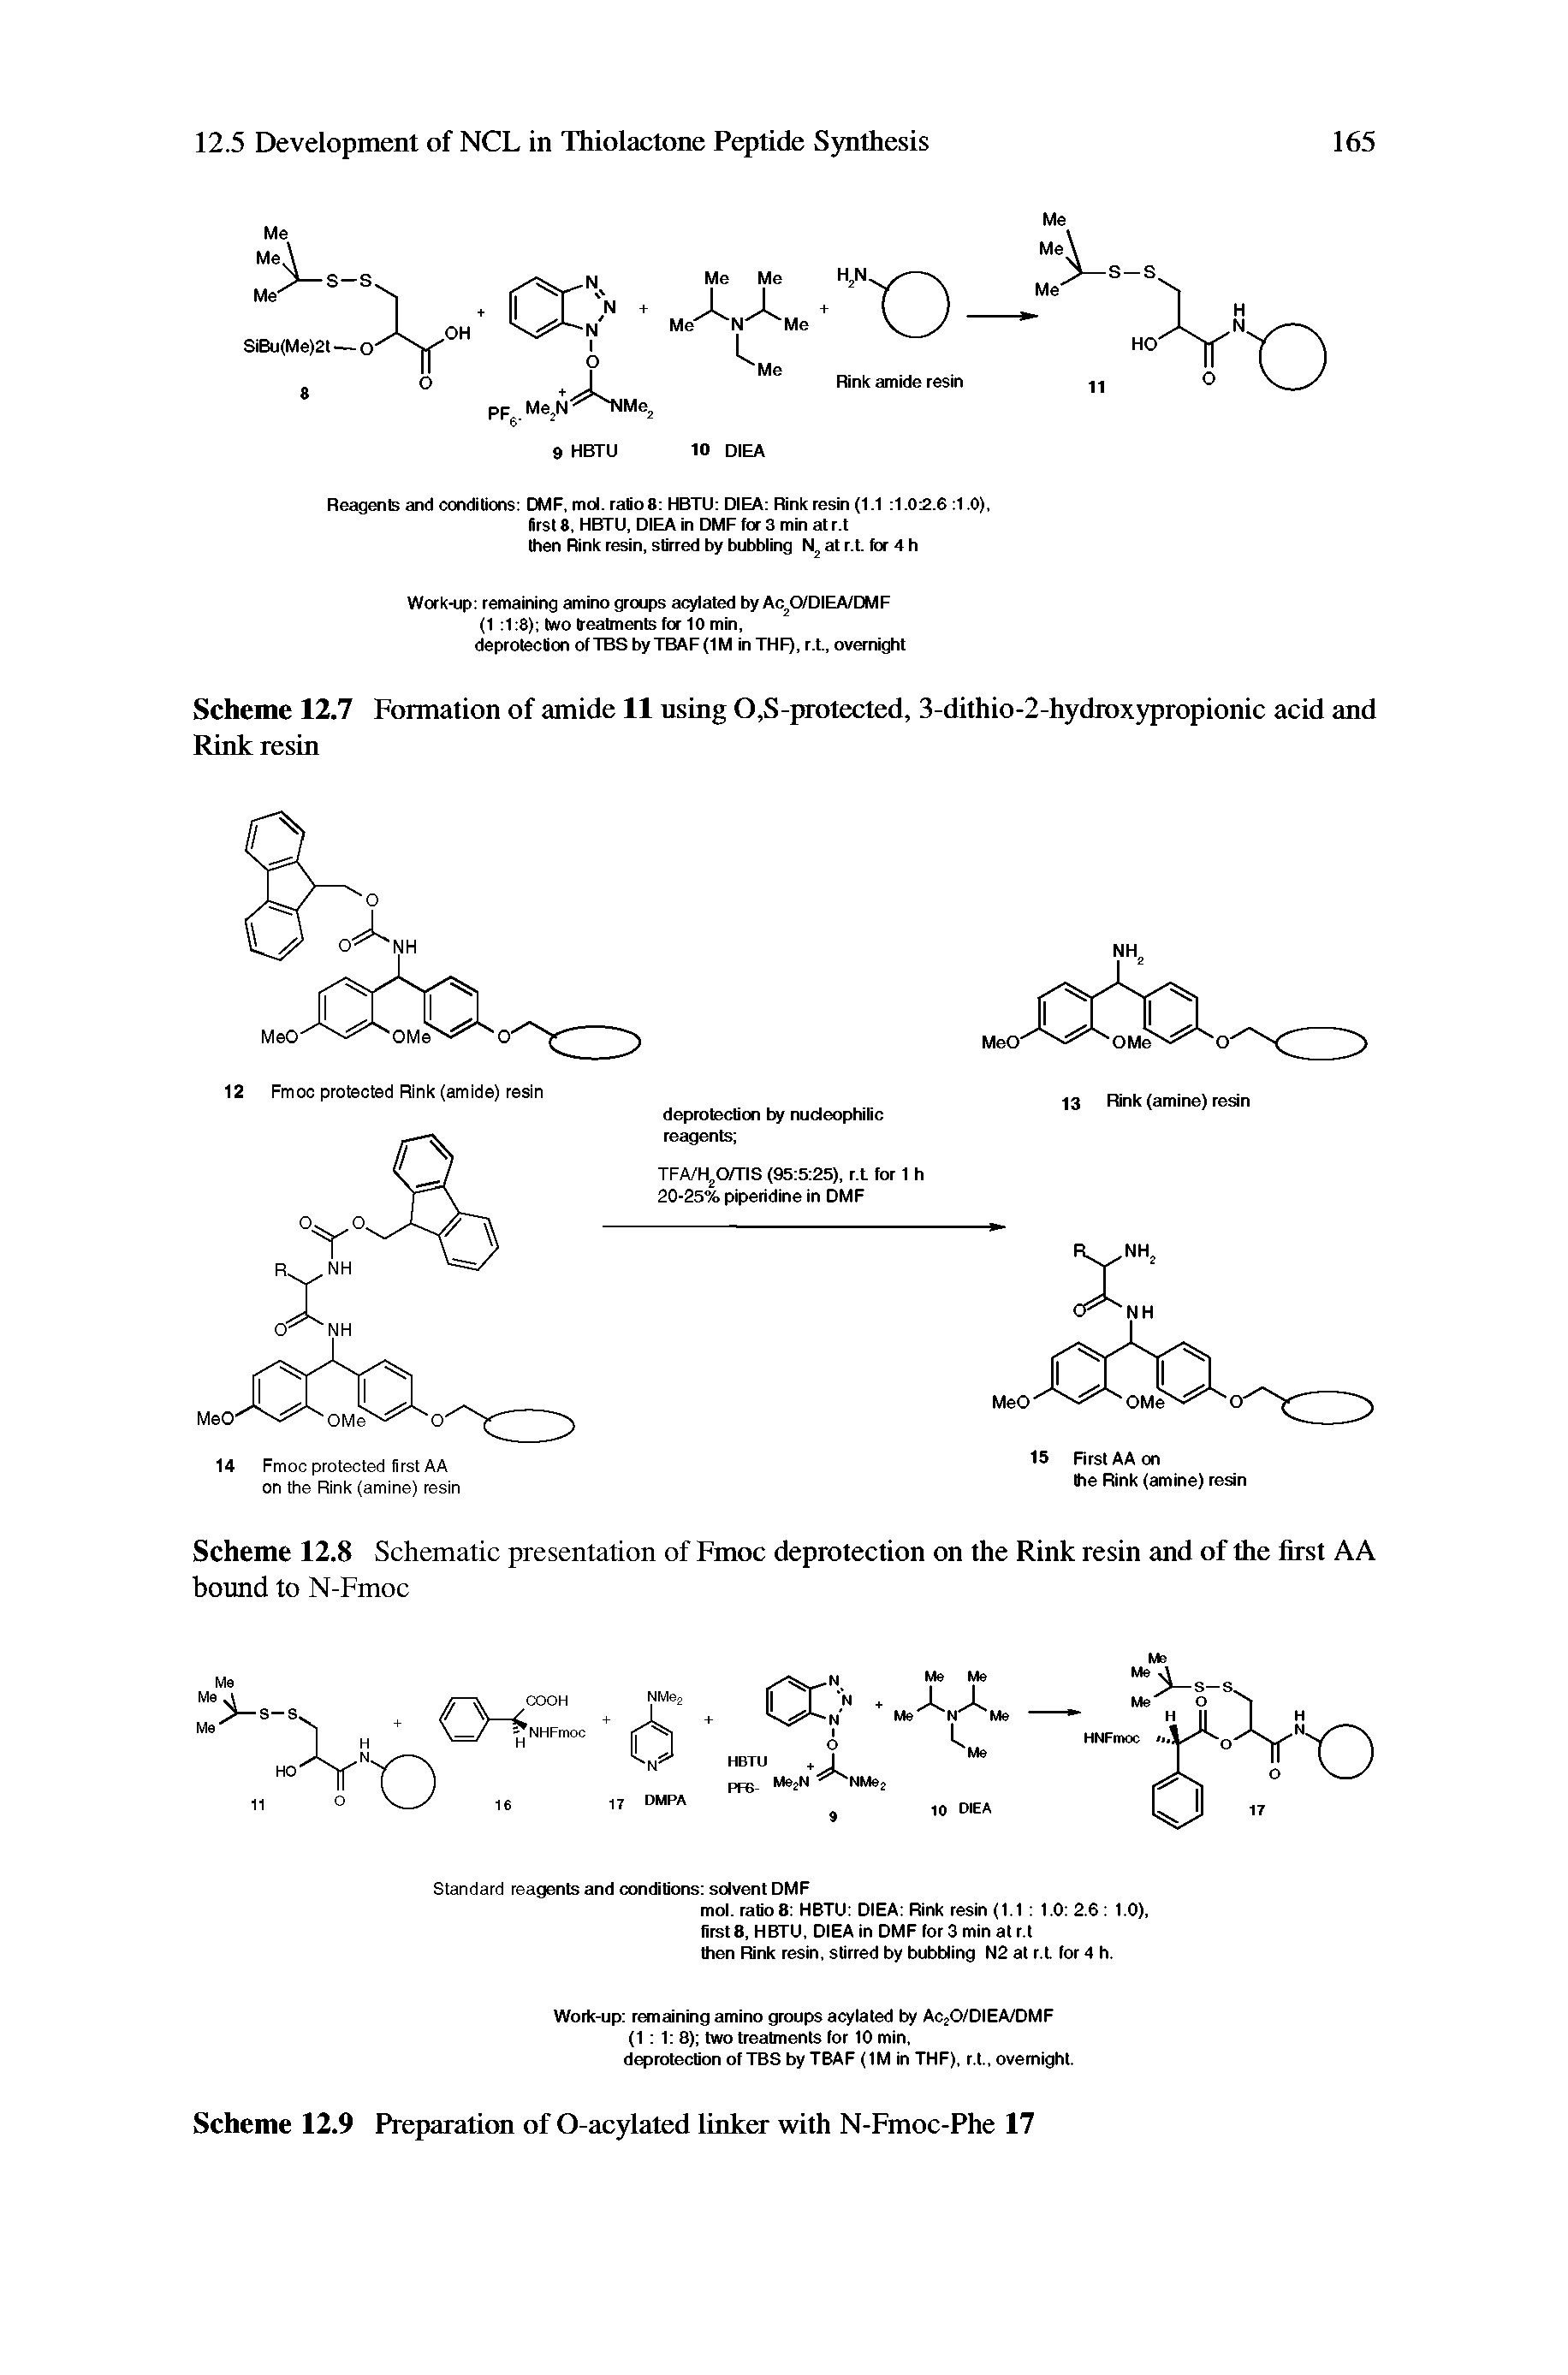 Scheme 12.7 Formation of amide 11 using 0,S-protected, 3-dithio-2-hydroxypropionic acid and Rink resin...